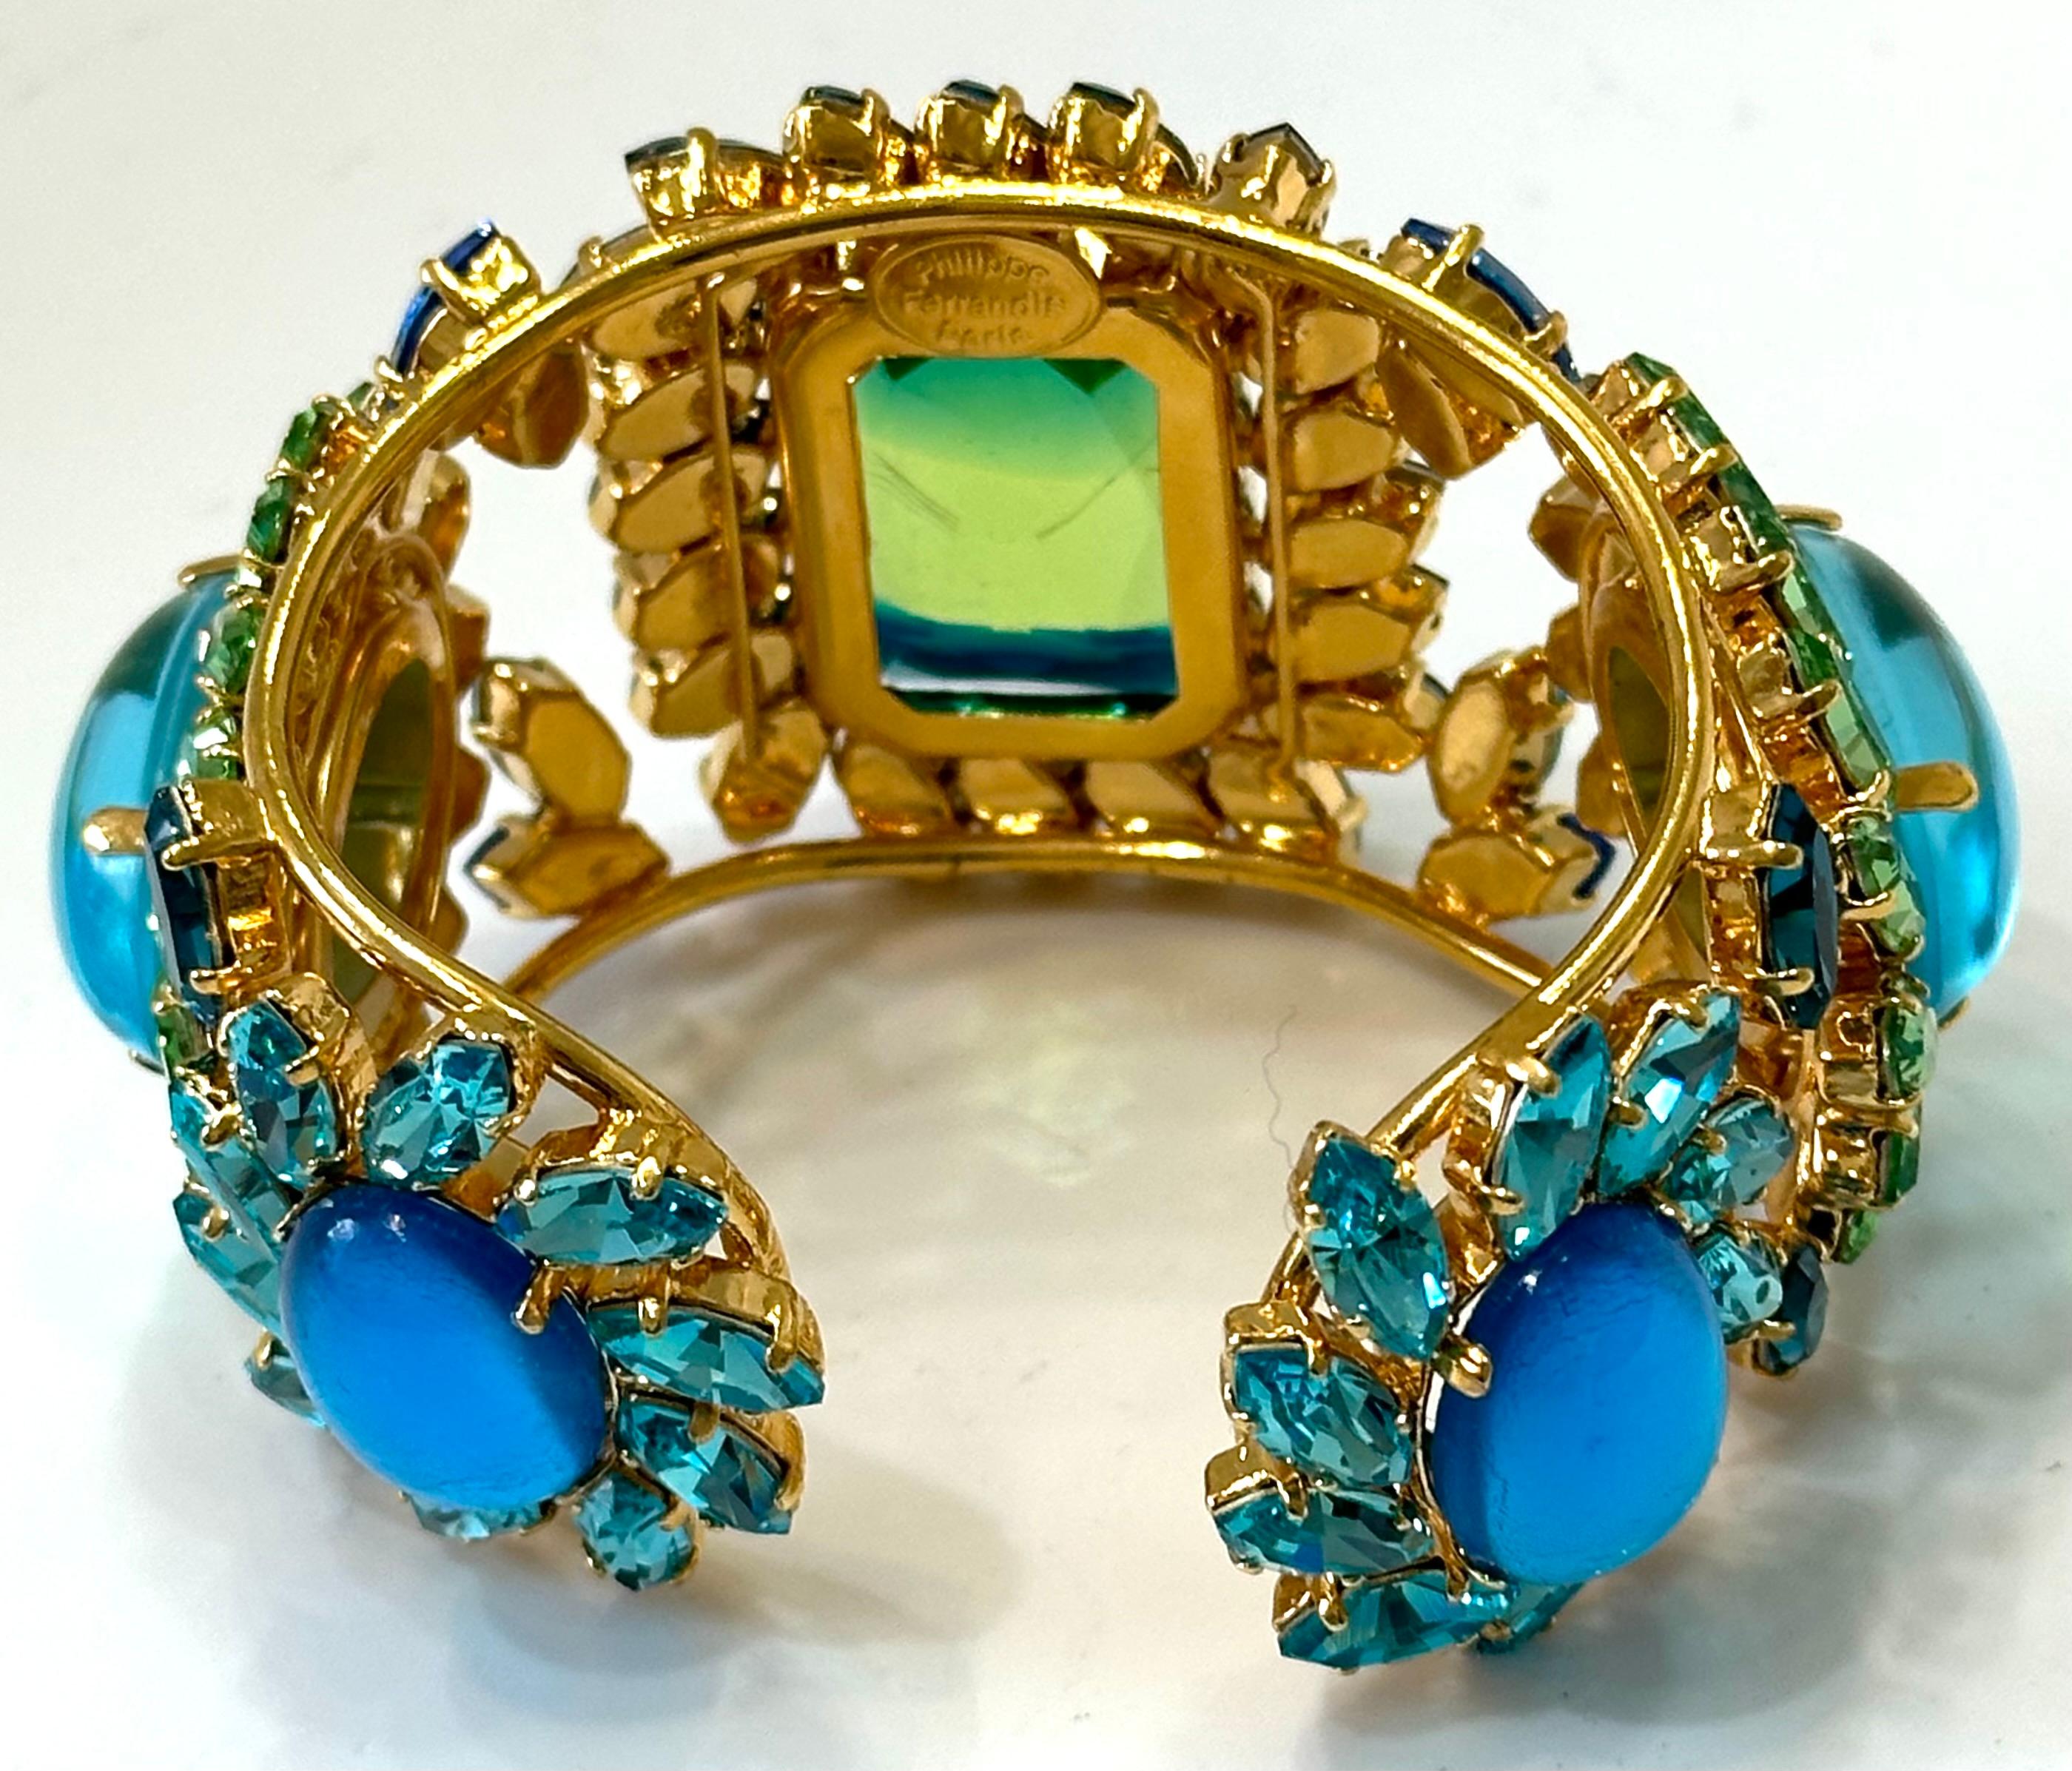 One a kind cuff made exclusively for Isabelle K Jewelry.
24carat gilded brass, Swarovski Crytal in exquisite colors. Handmade glass cabochons. Bracelets is very flexible and can fit most size wrist 
One of a kind made exclusively for Isabelle K